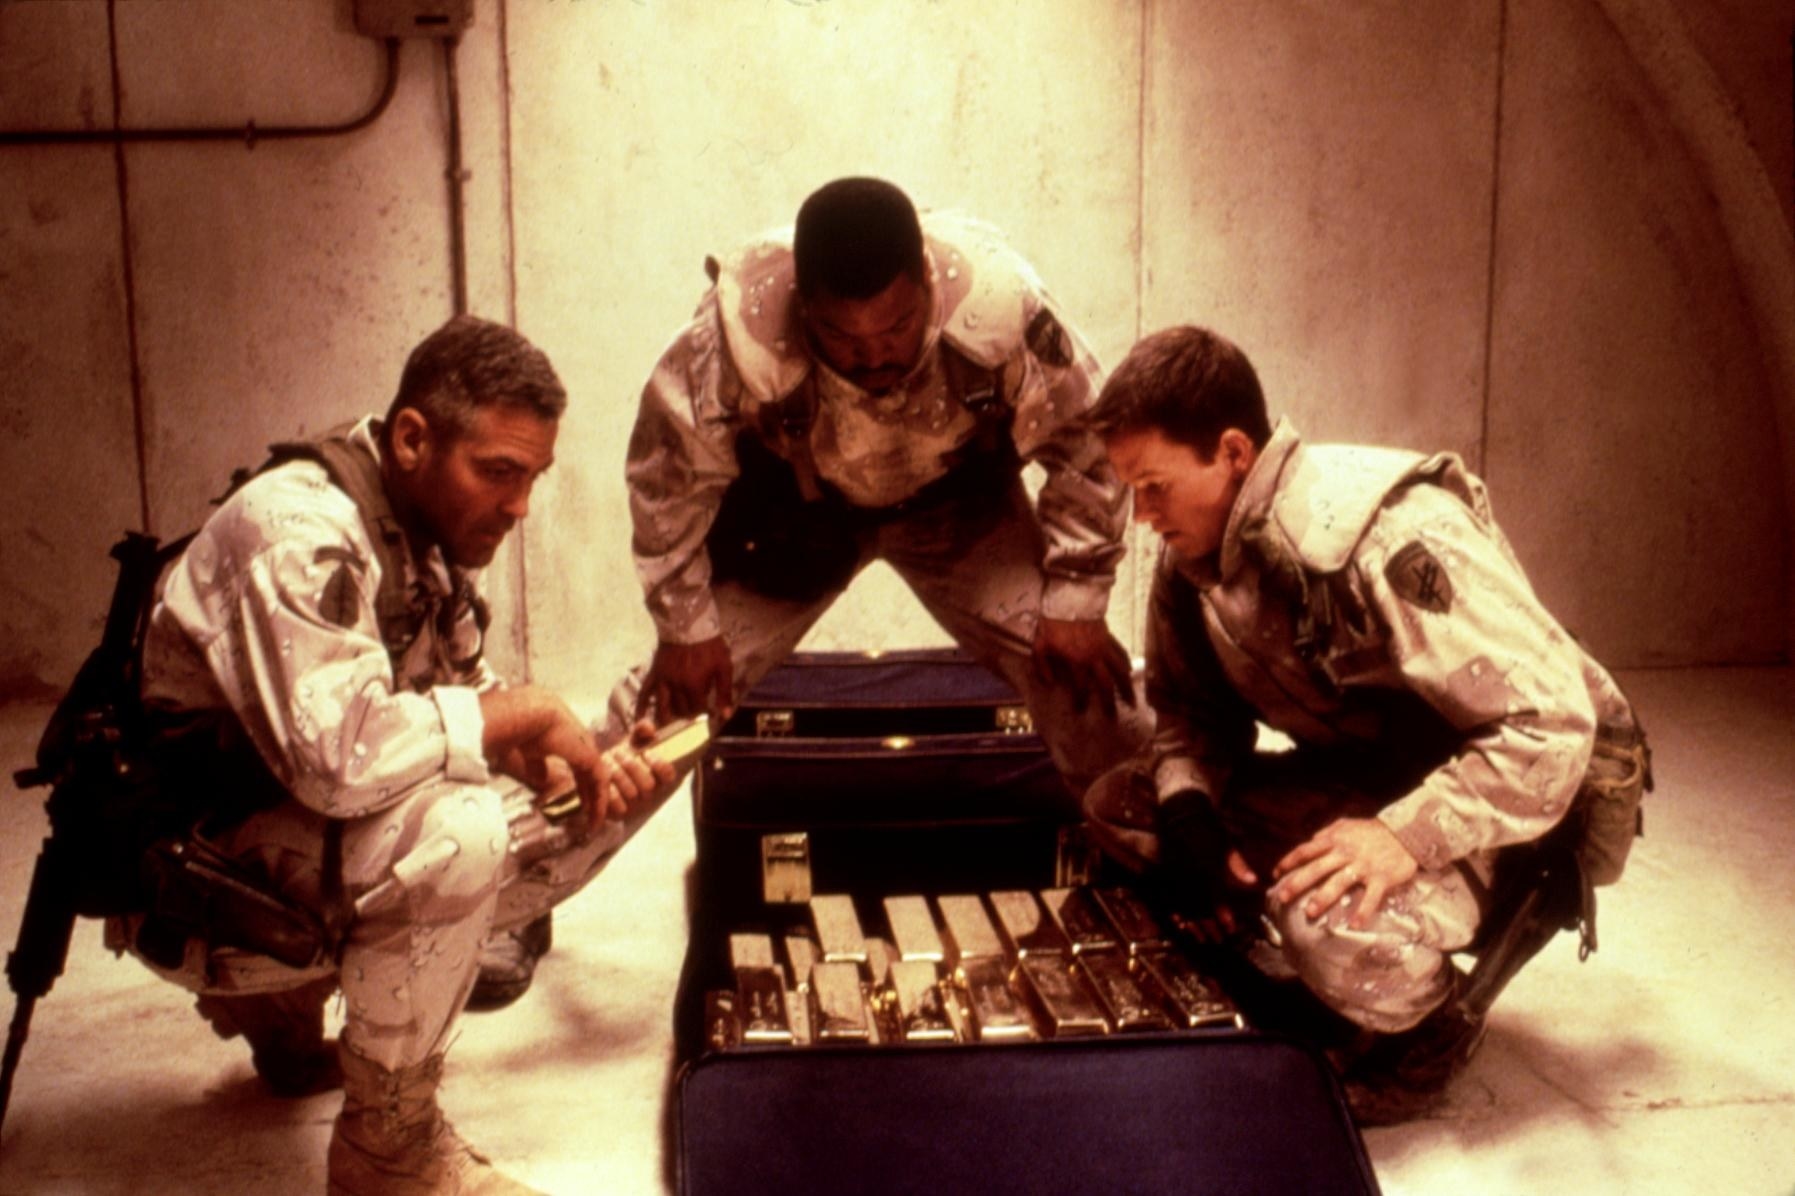 three characters surround a crate of gold